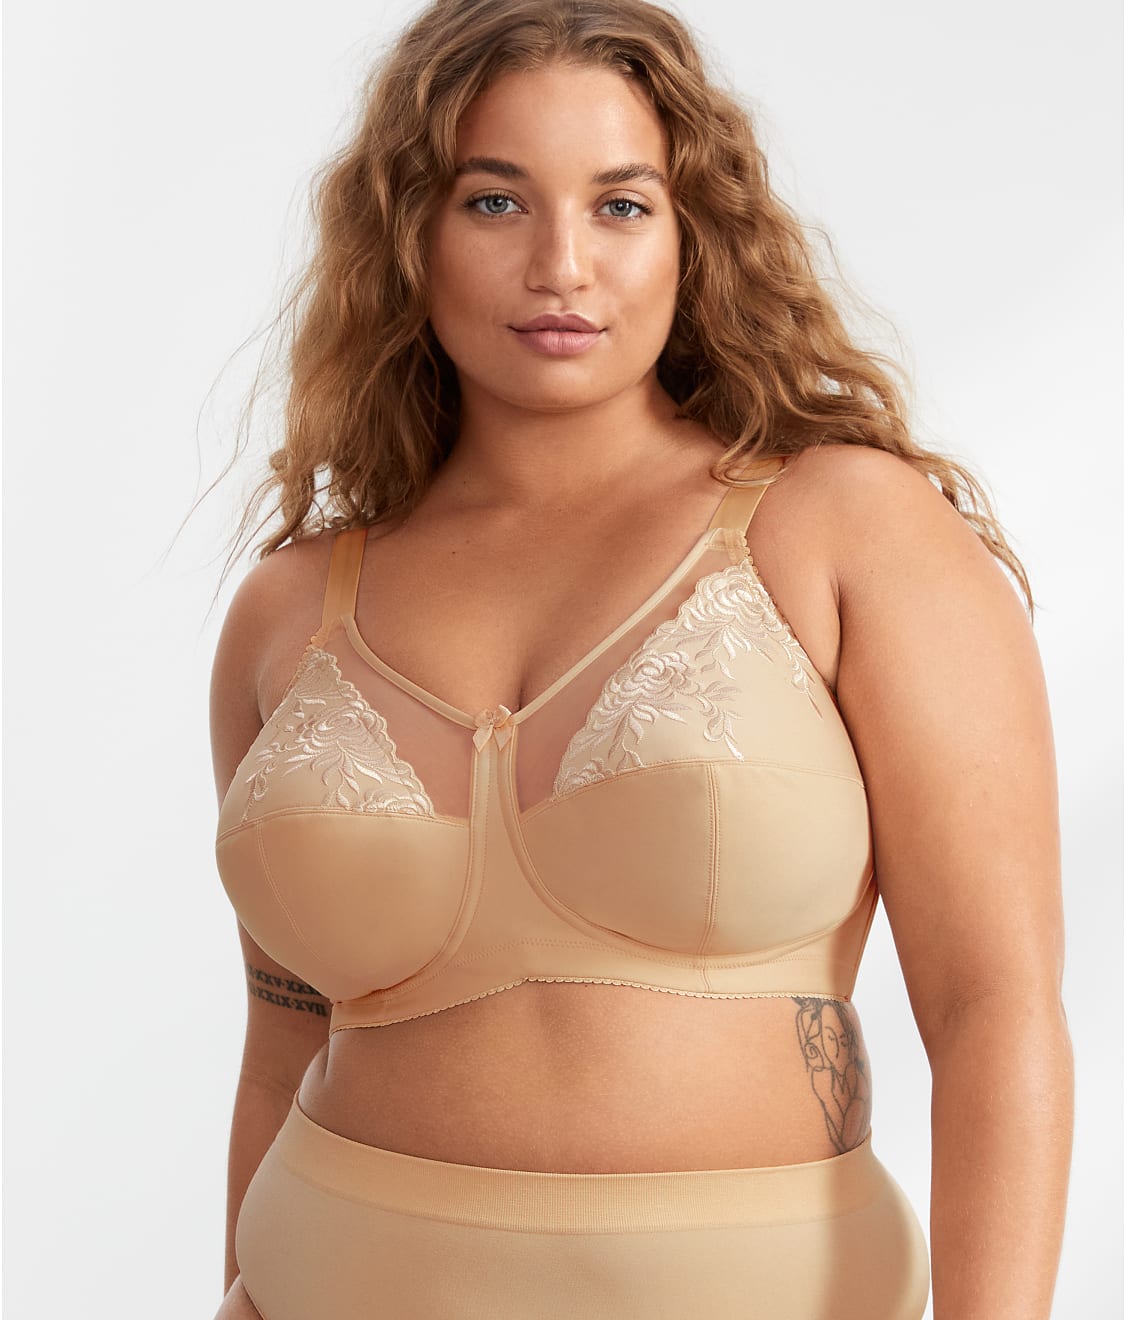 Shop Empreinte Full Cup Bras for Women up to 75% Off